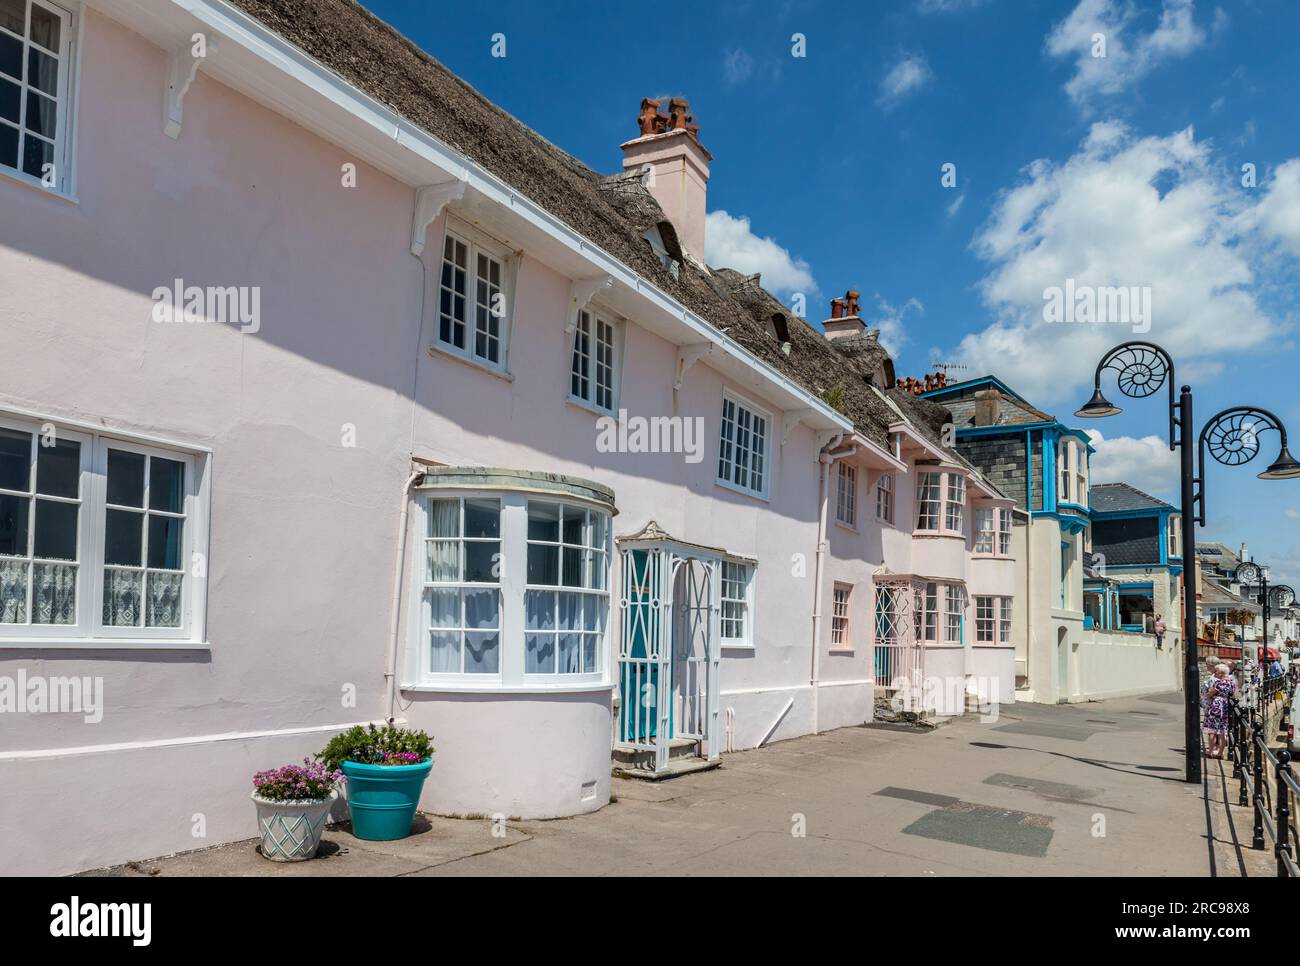 geography / travel, Great Britain, Dorset, Lyme Regis, promenade in the bathing resort Lyme Regis, ADDITIONAL-RIGHTS-CLEARANCE-INFO-NOT-AVAILABLE Stock Photo